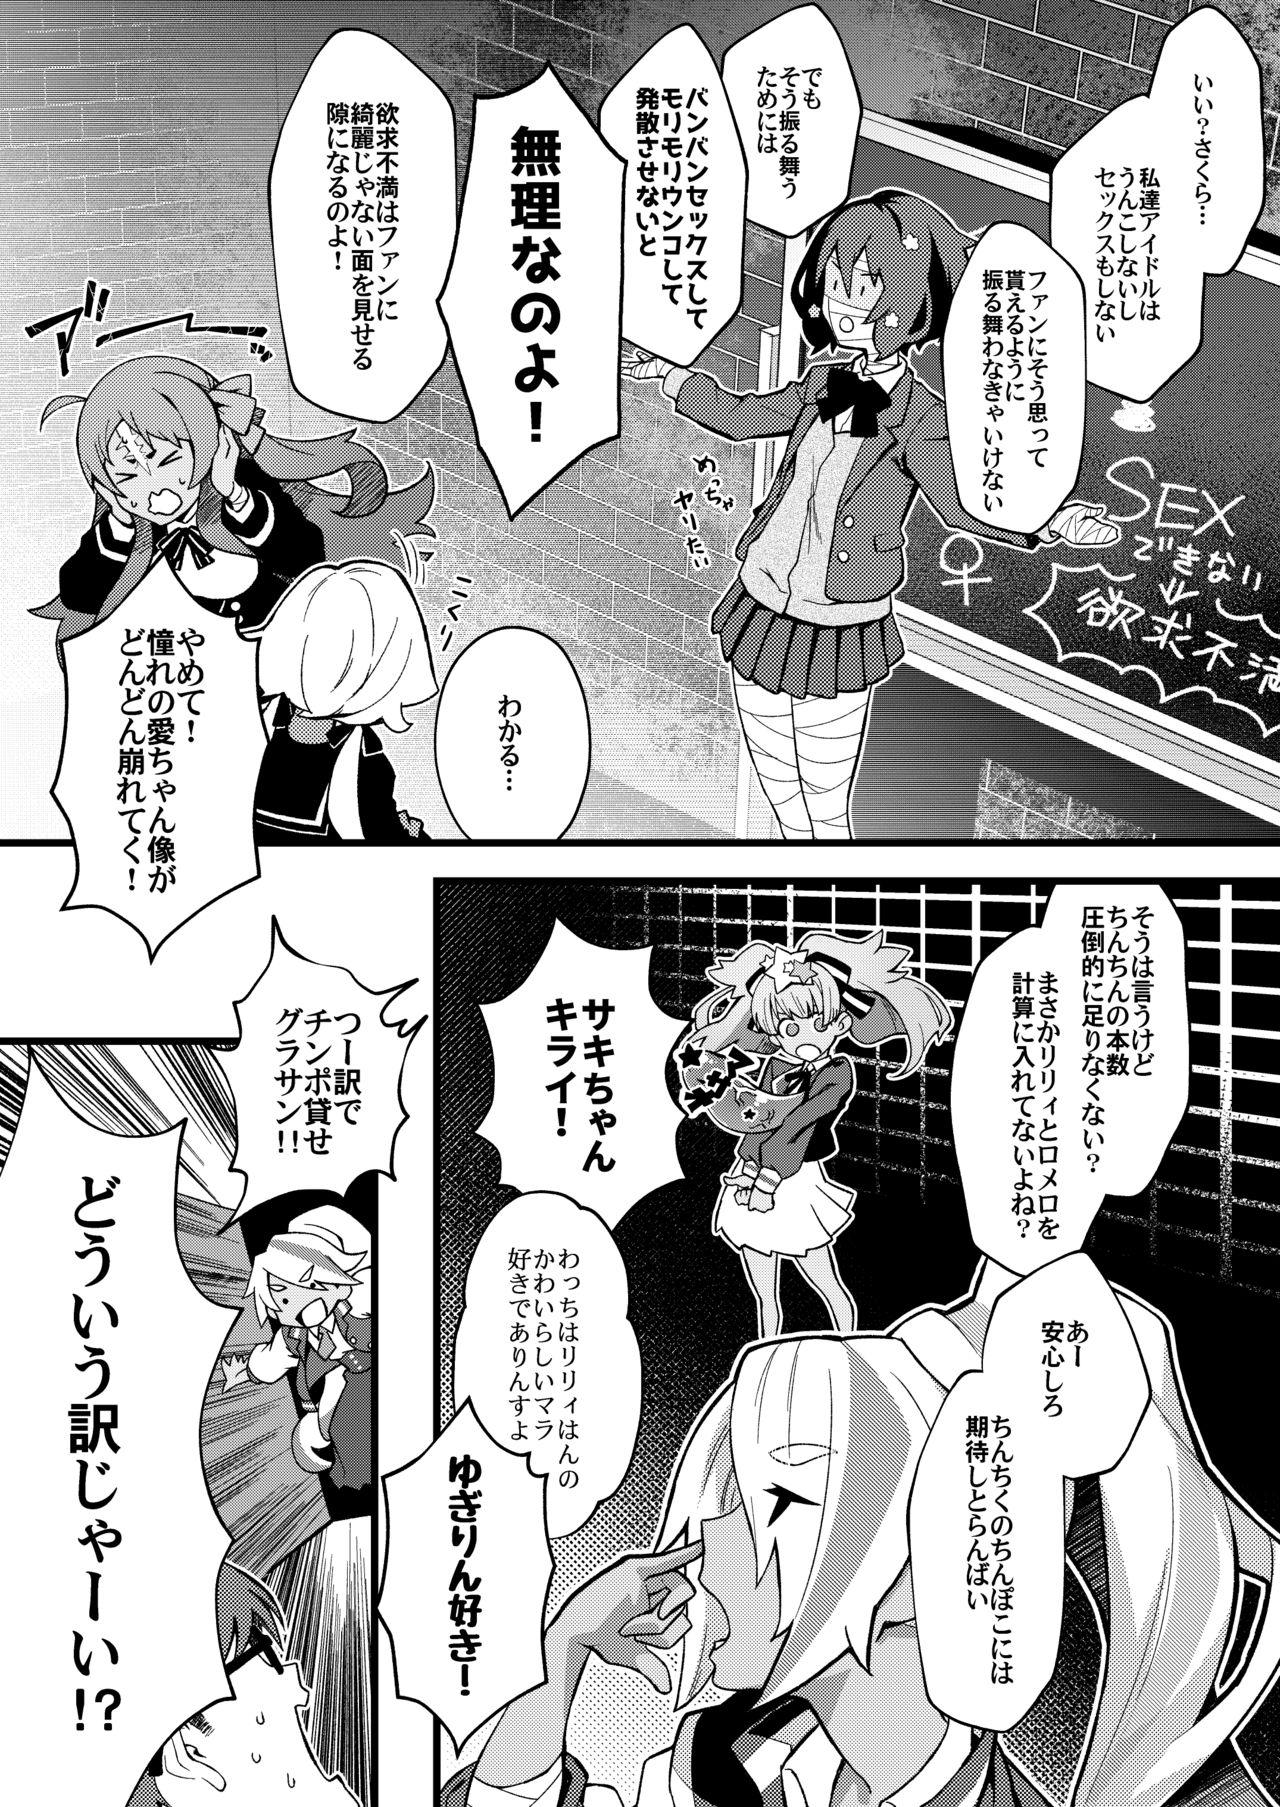 Ejaculation zombie and sex - Zombie land saga Finger - Page 4